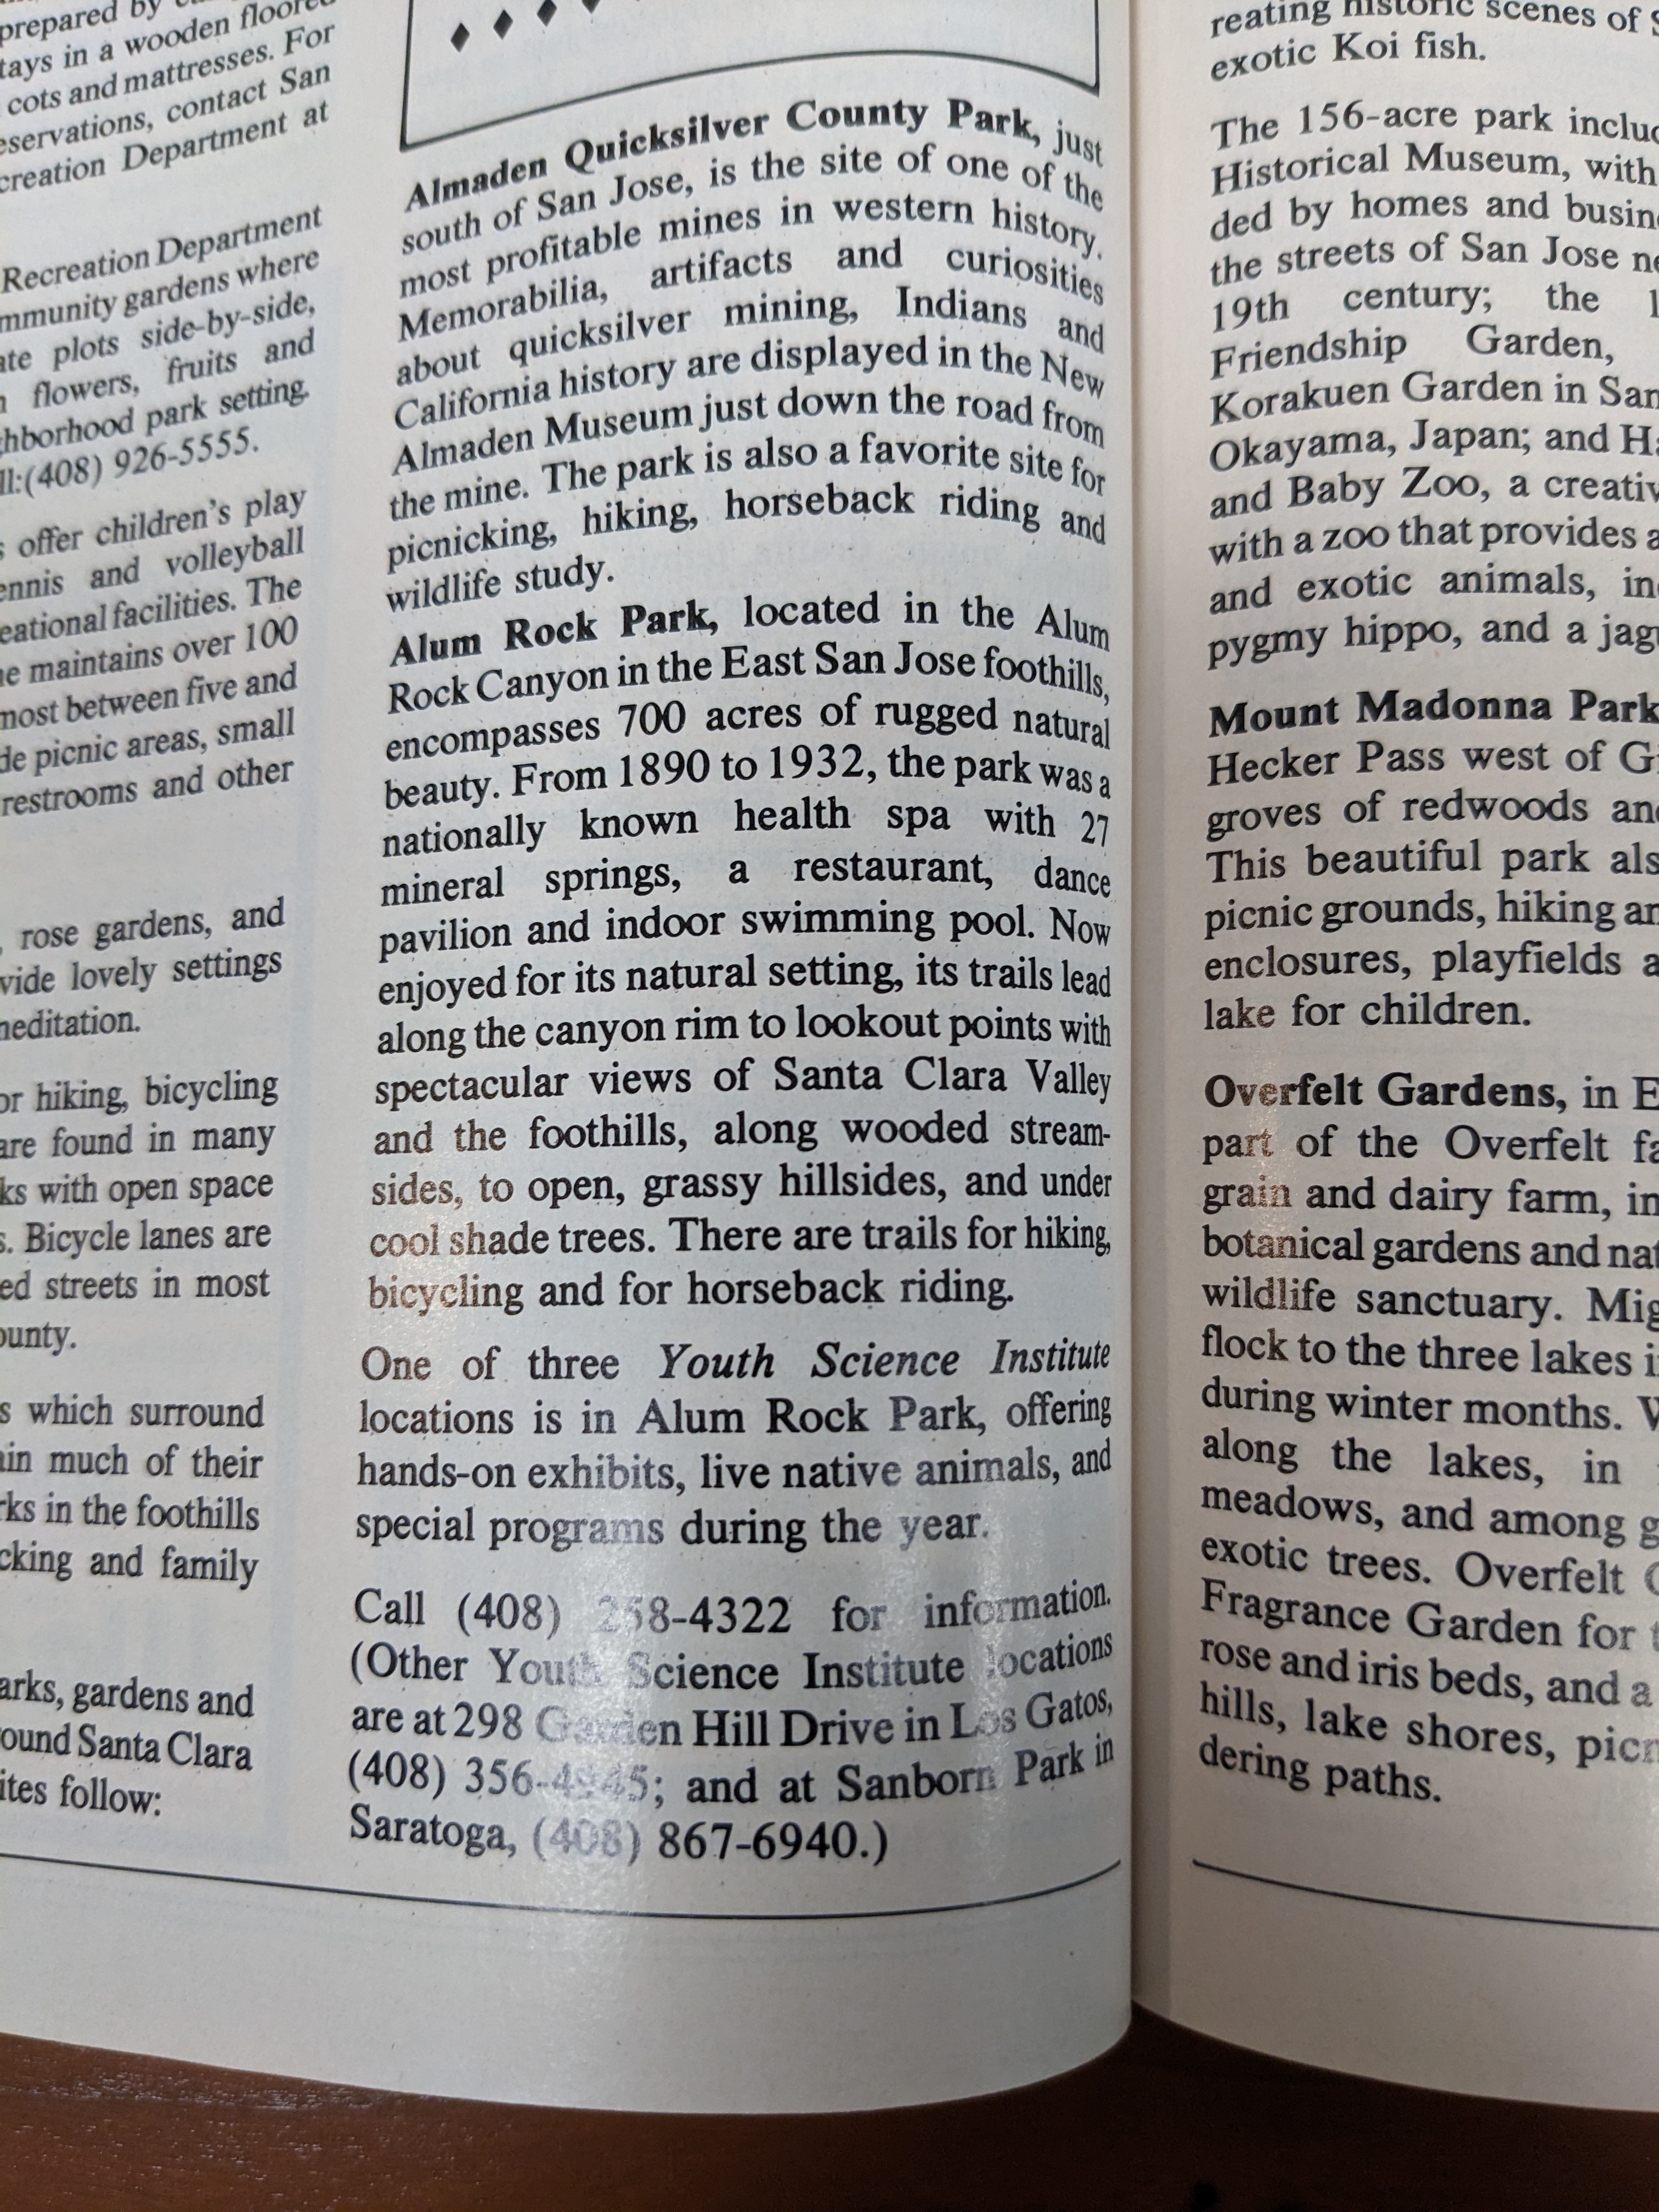 Excerpt from a magazine from 1987, detailing changes to Alum Rock Park.